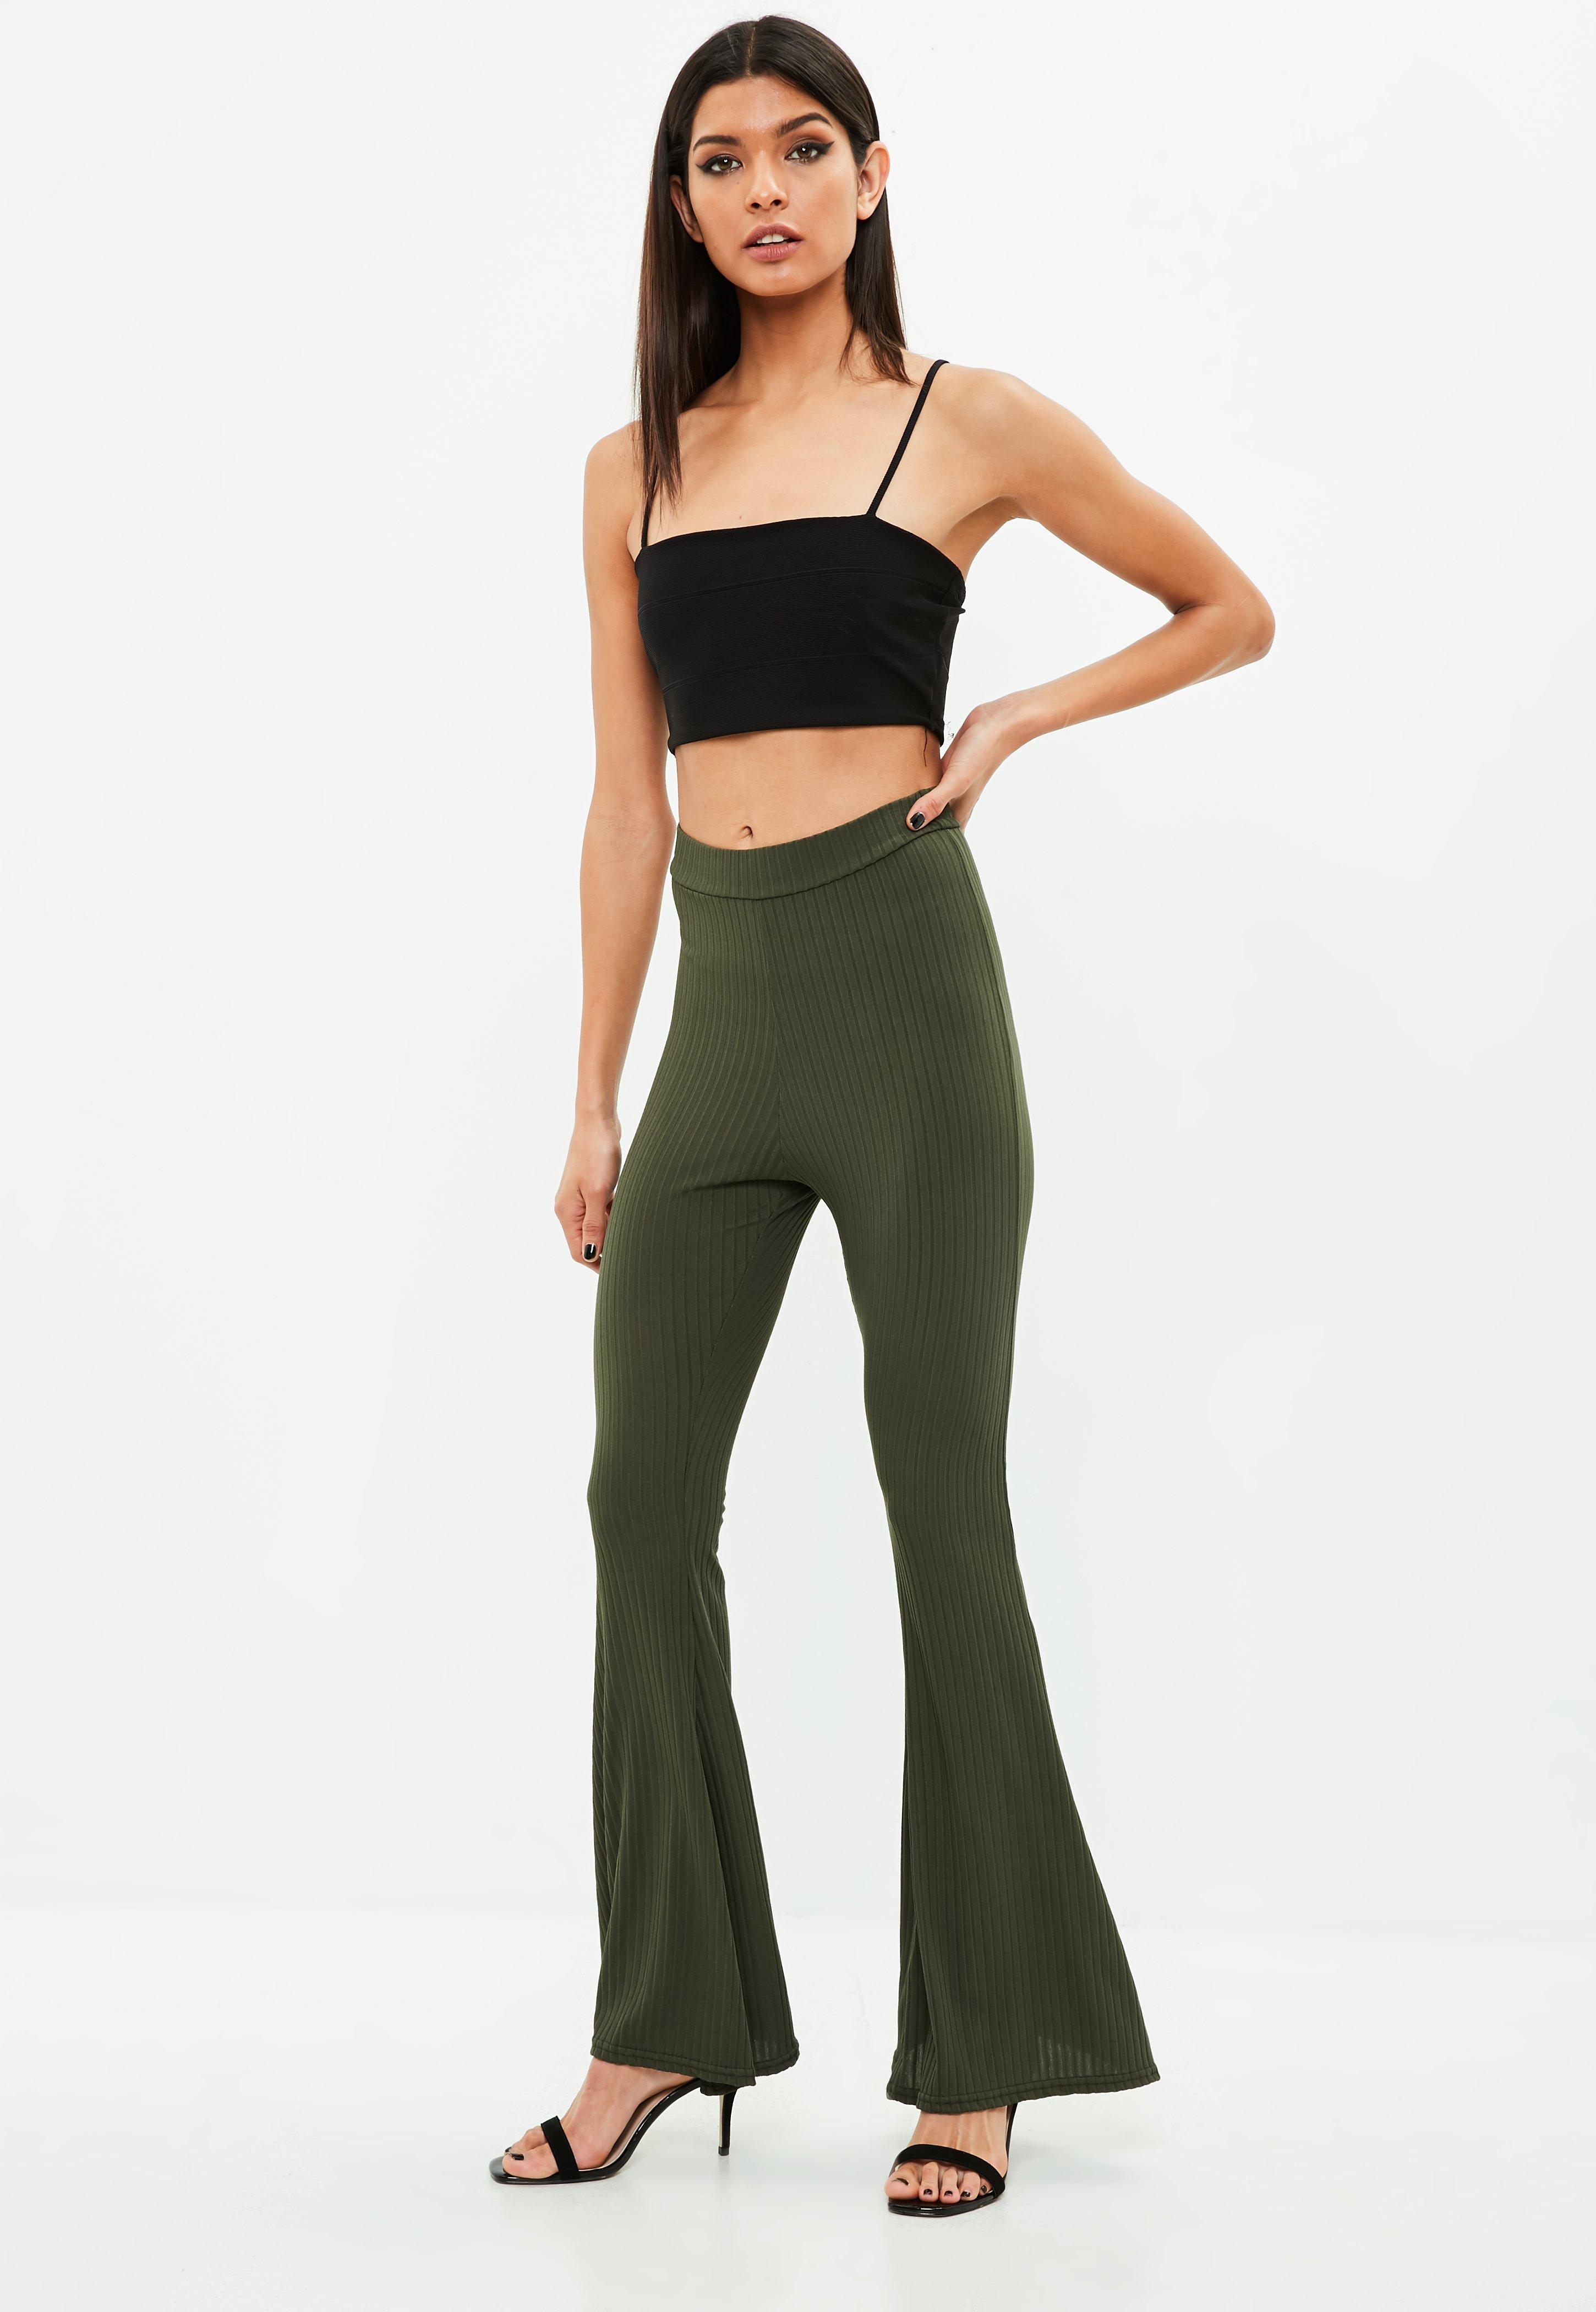 Lyst - Missguided Khaki Ribbed Kick Flare Trousers in Green